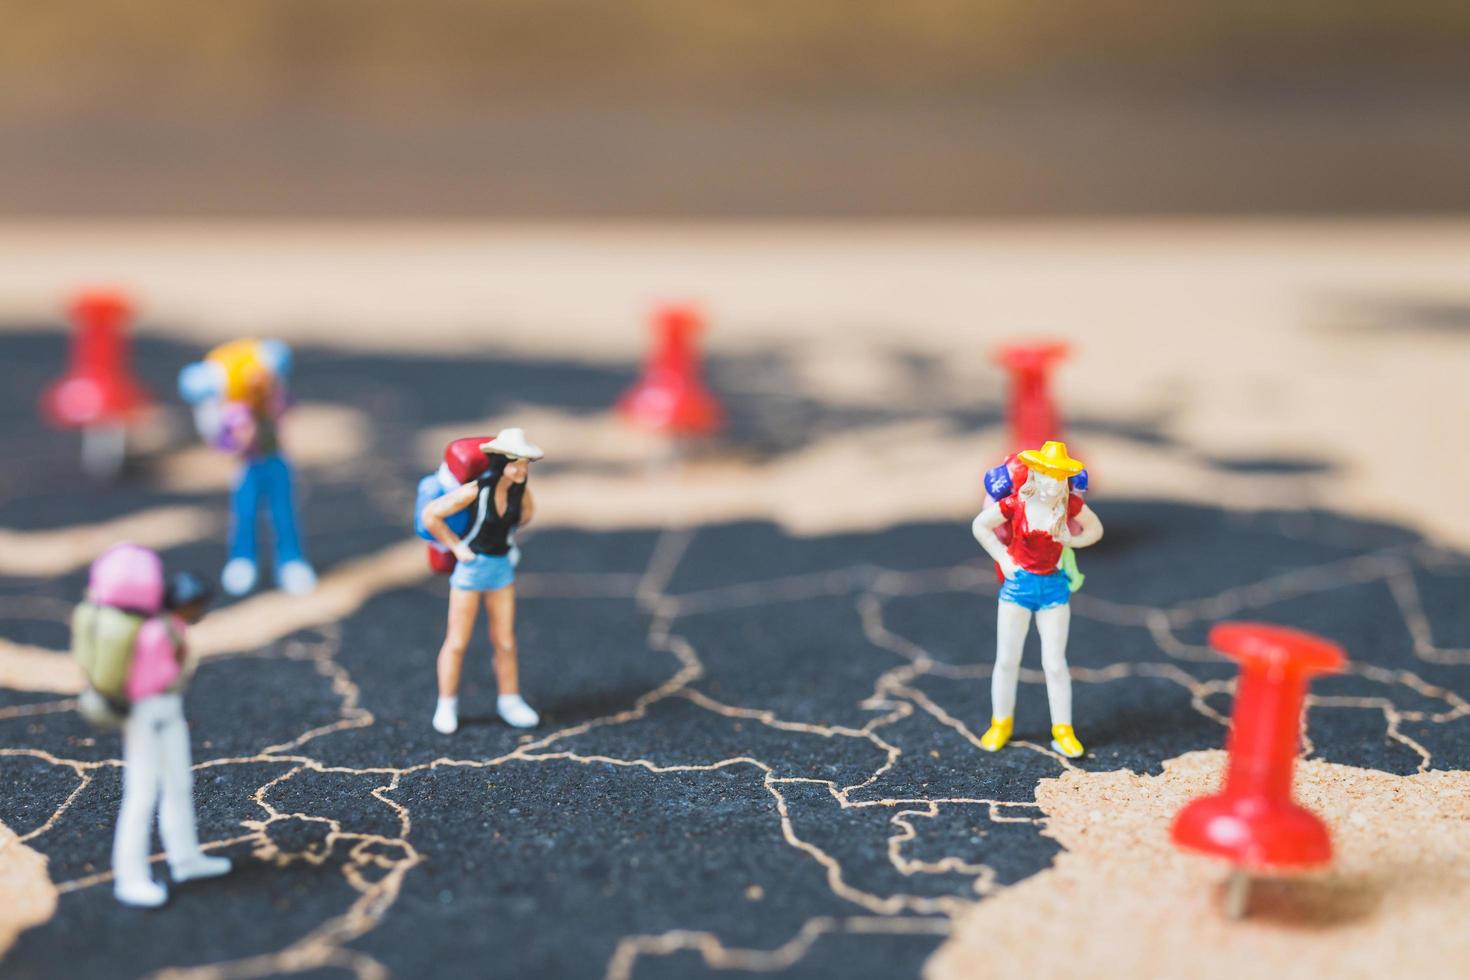 Miniature backpackers walking on a world map, tourism and travel concept photo